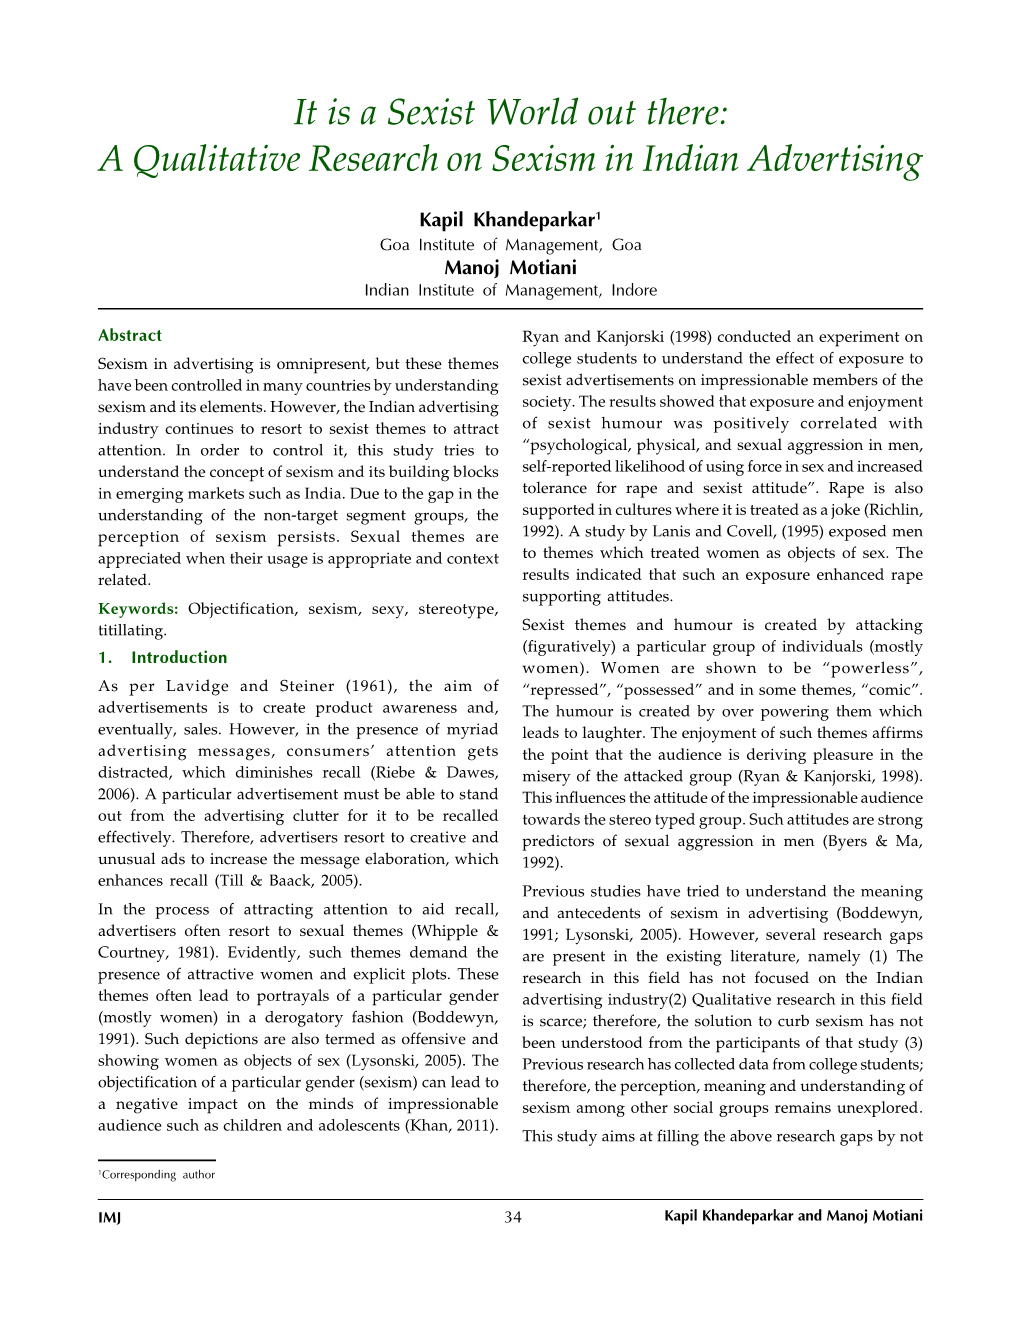 A Qualitative Research on Sexism in Indian Advertising